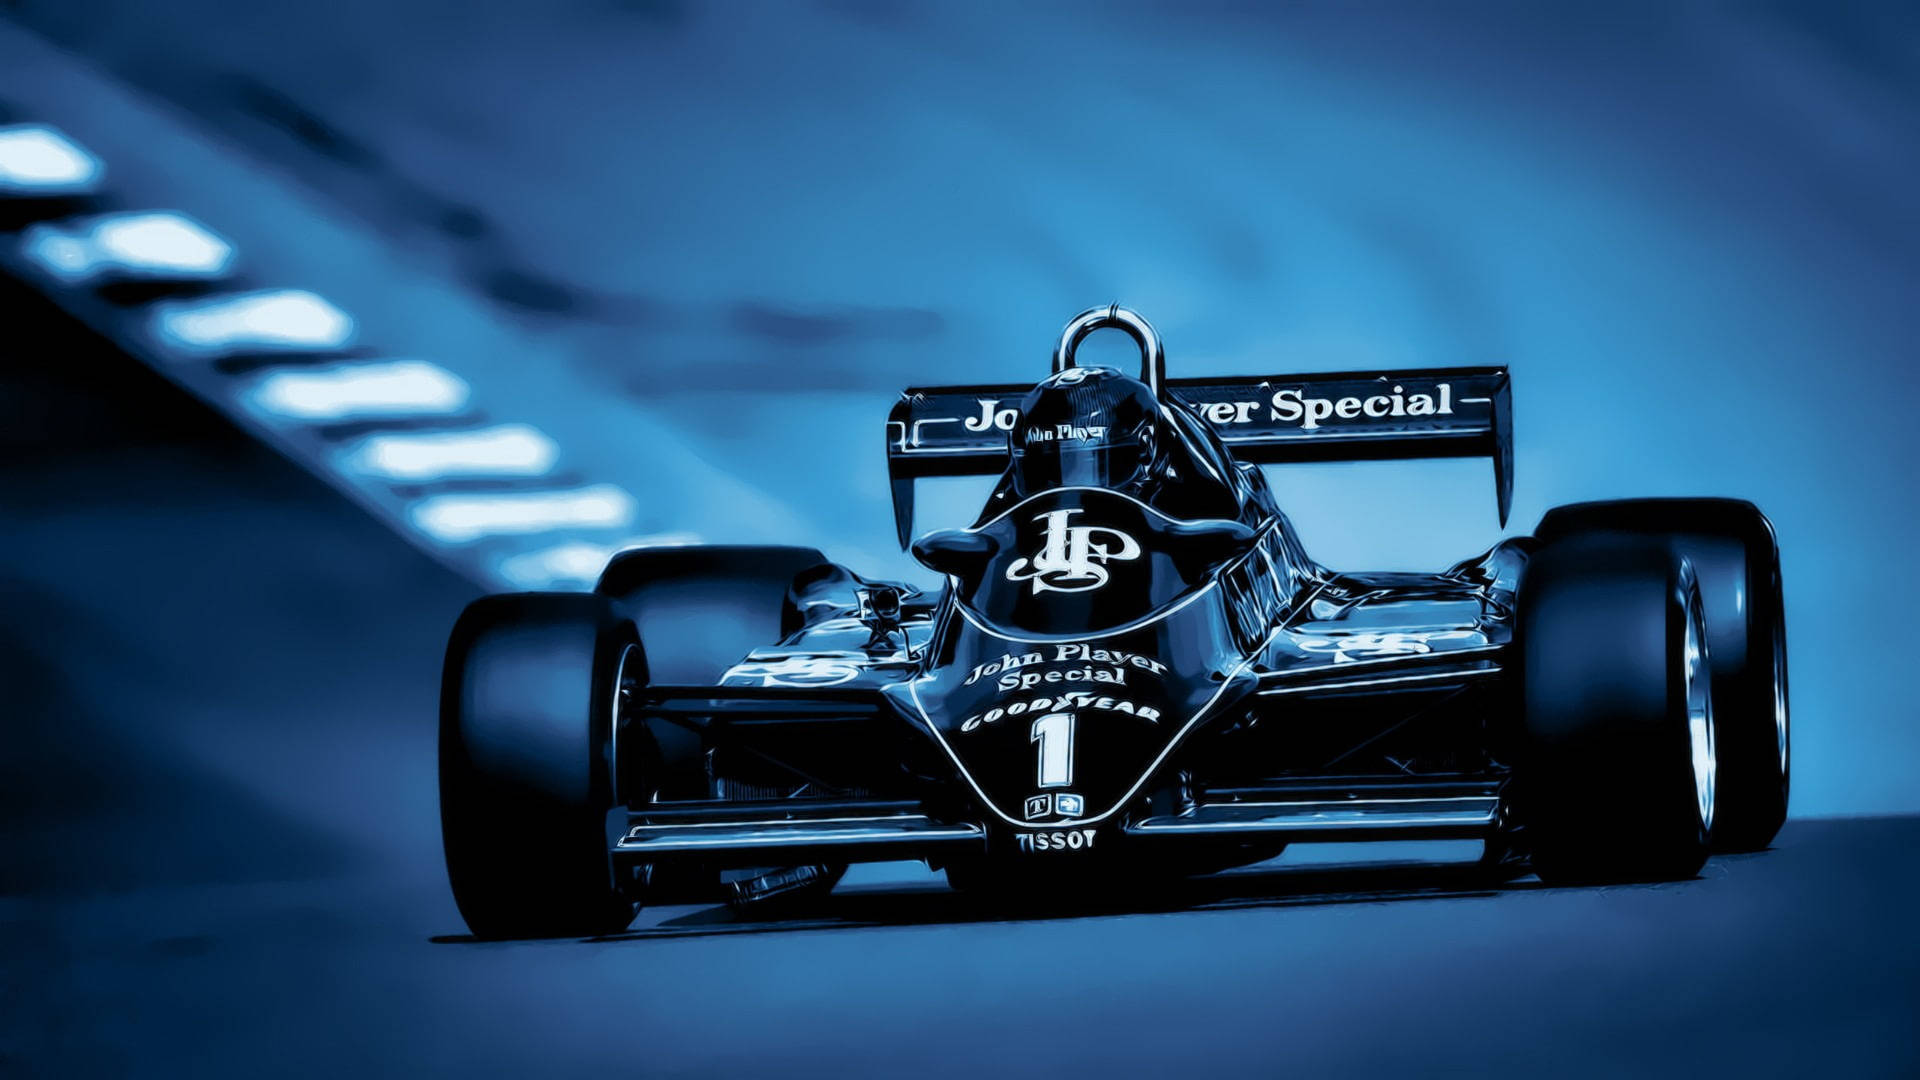 F1 Racing Car In Blue Aesthetic Background